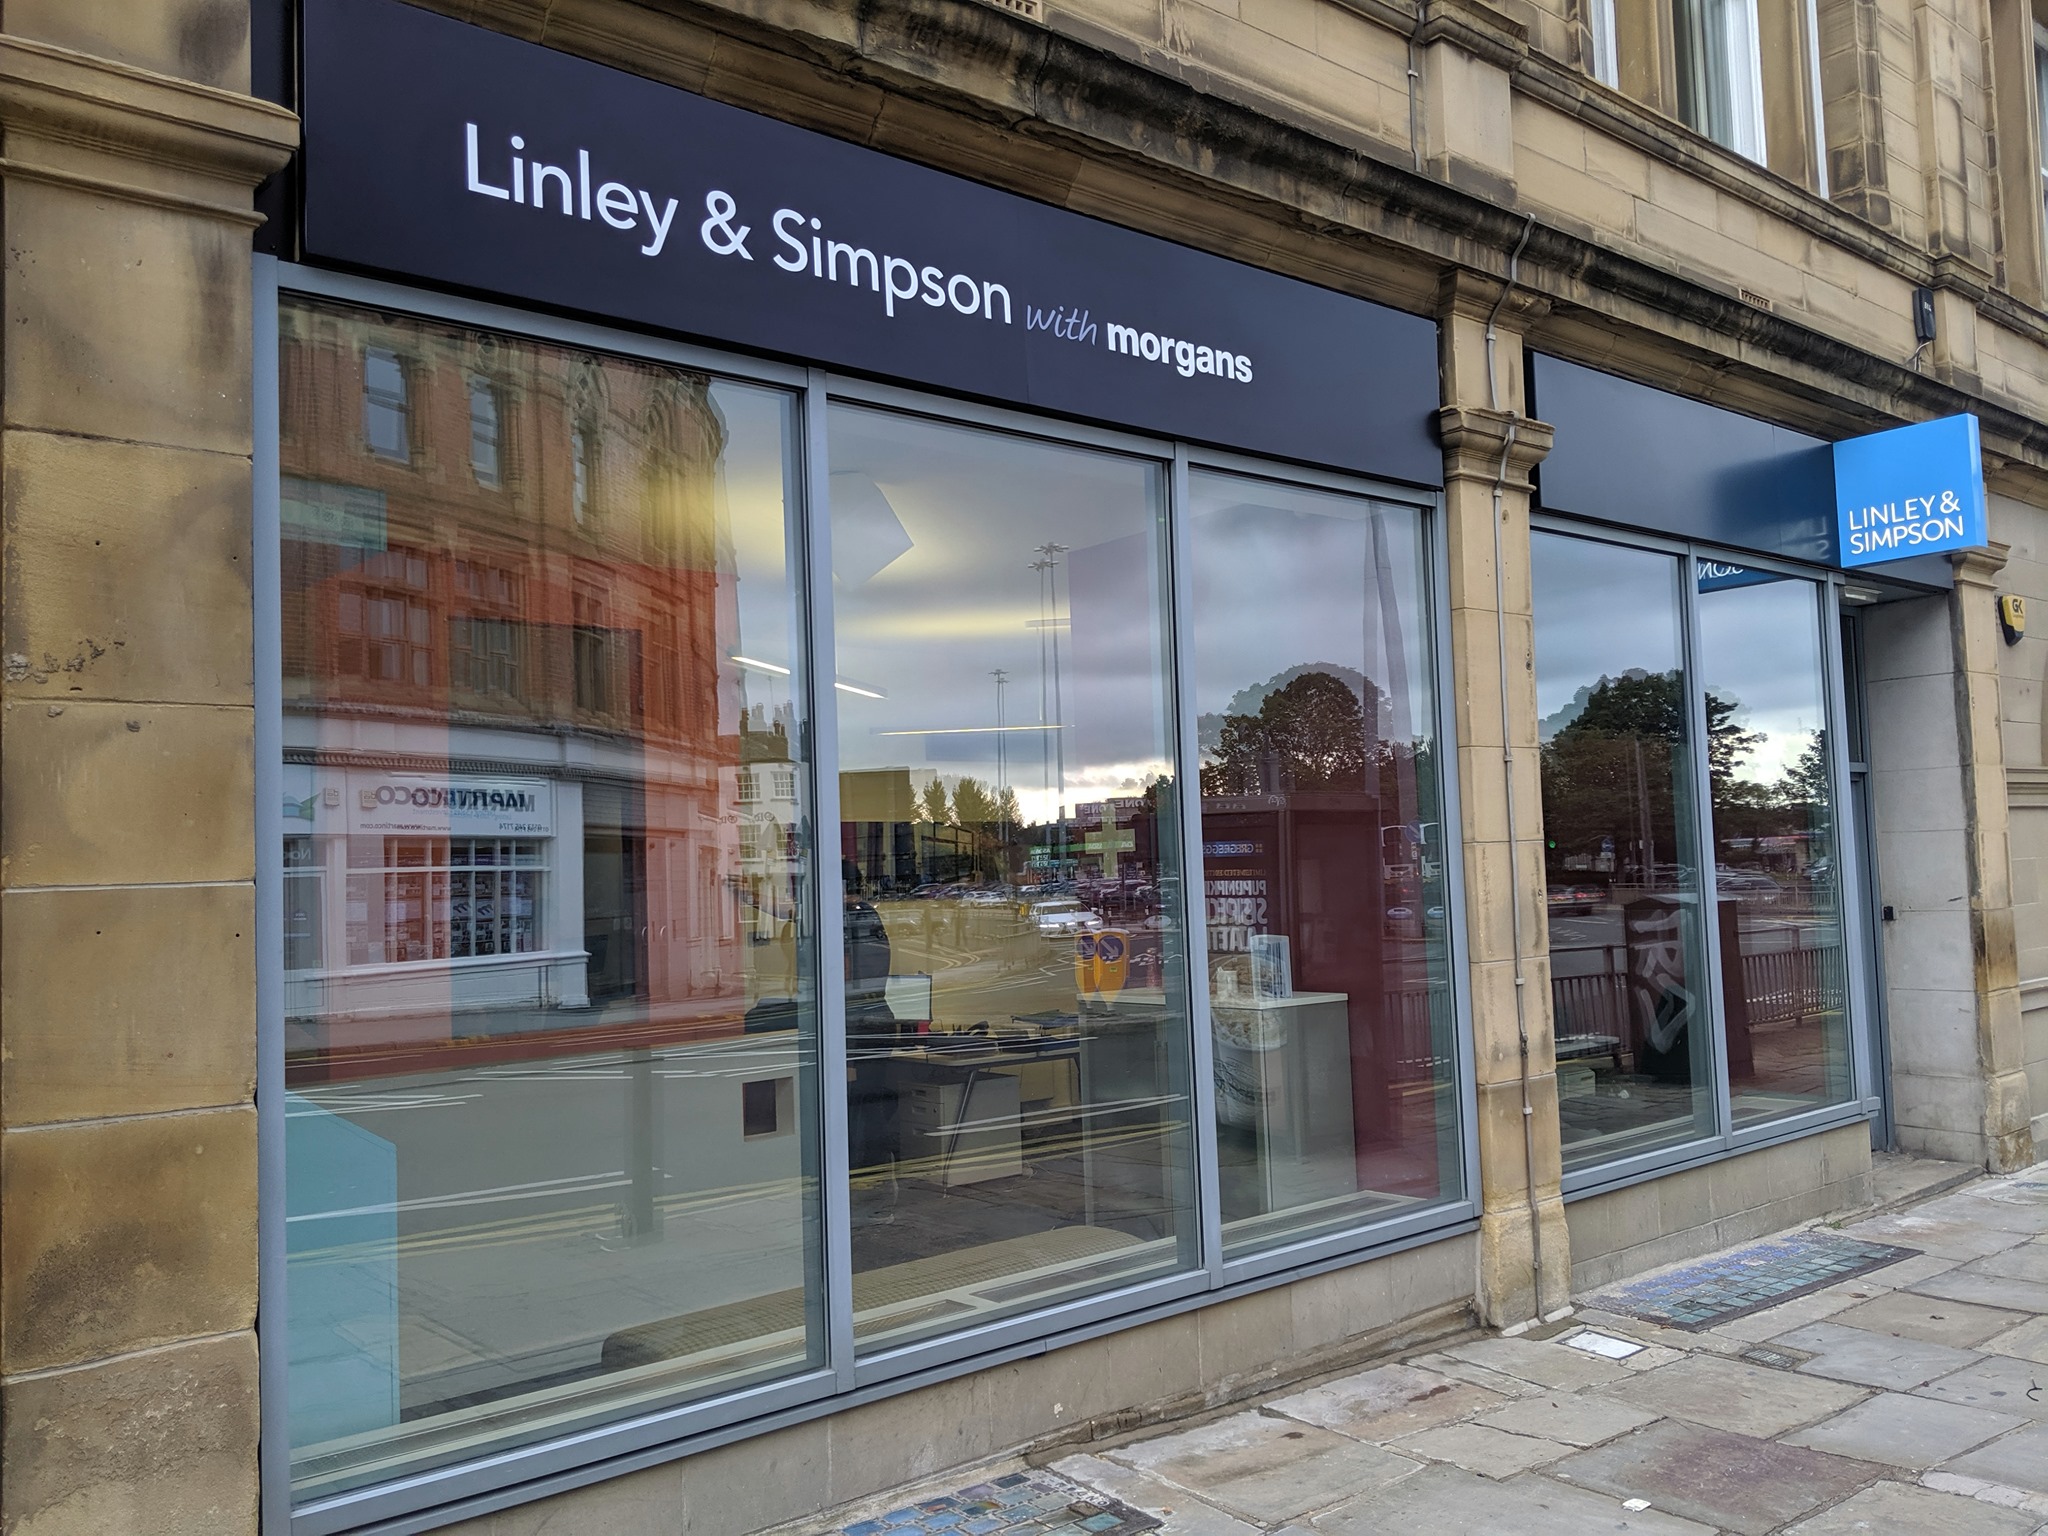 LDC-backed Linley & Simpson expands into Humberside with latest acquisition